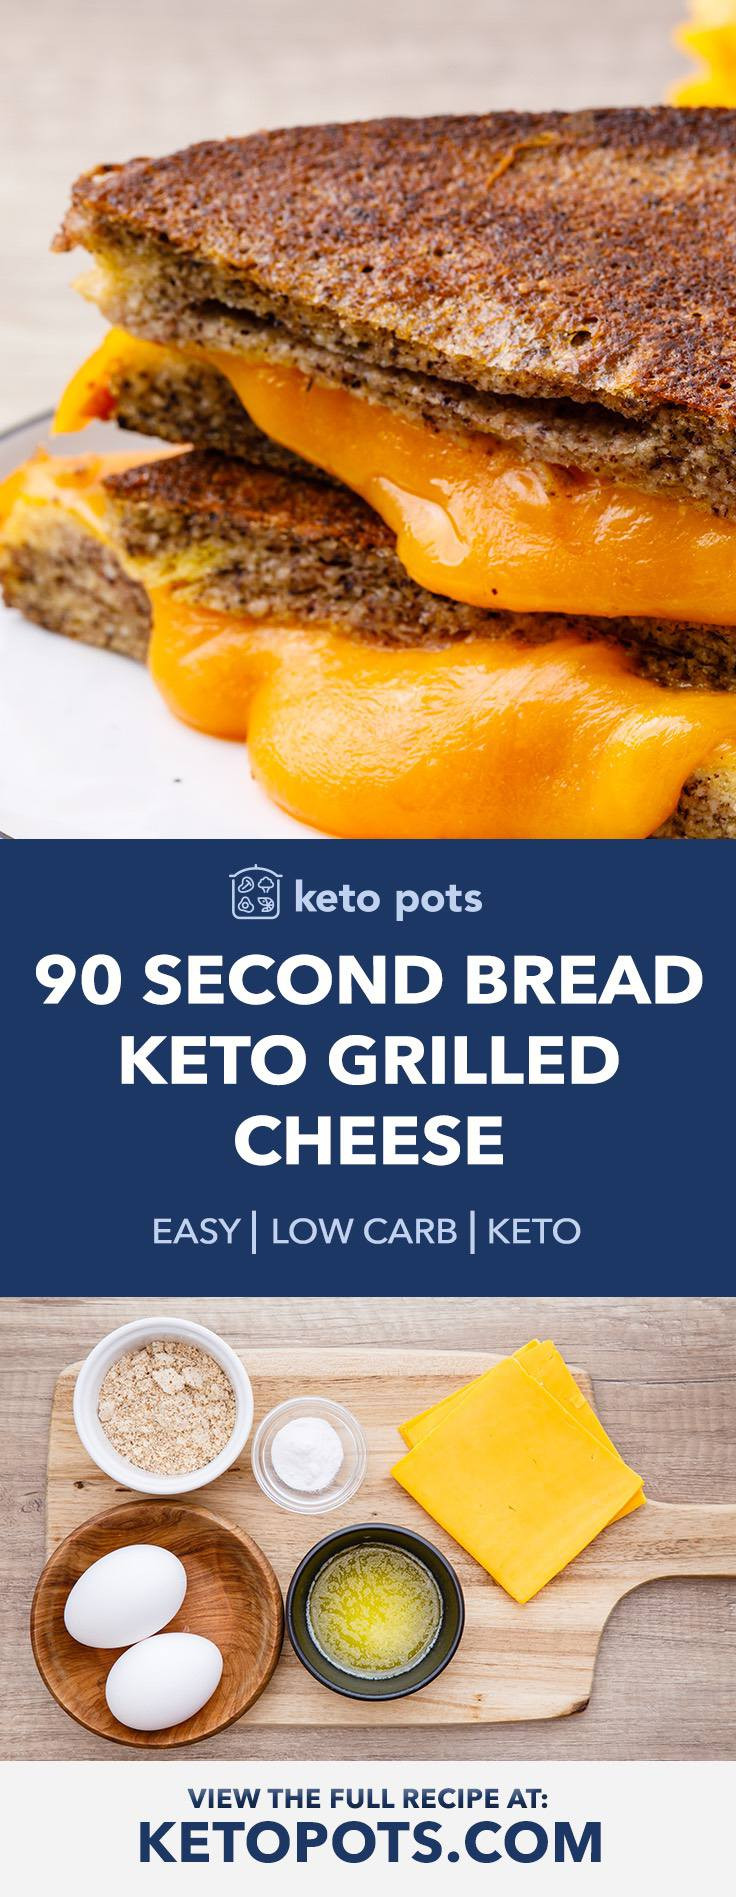 90 Second Keto Bread Grilled Cheese
 How to Make the Best Keto Grilled Cheese with 90 Second